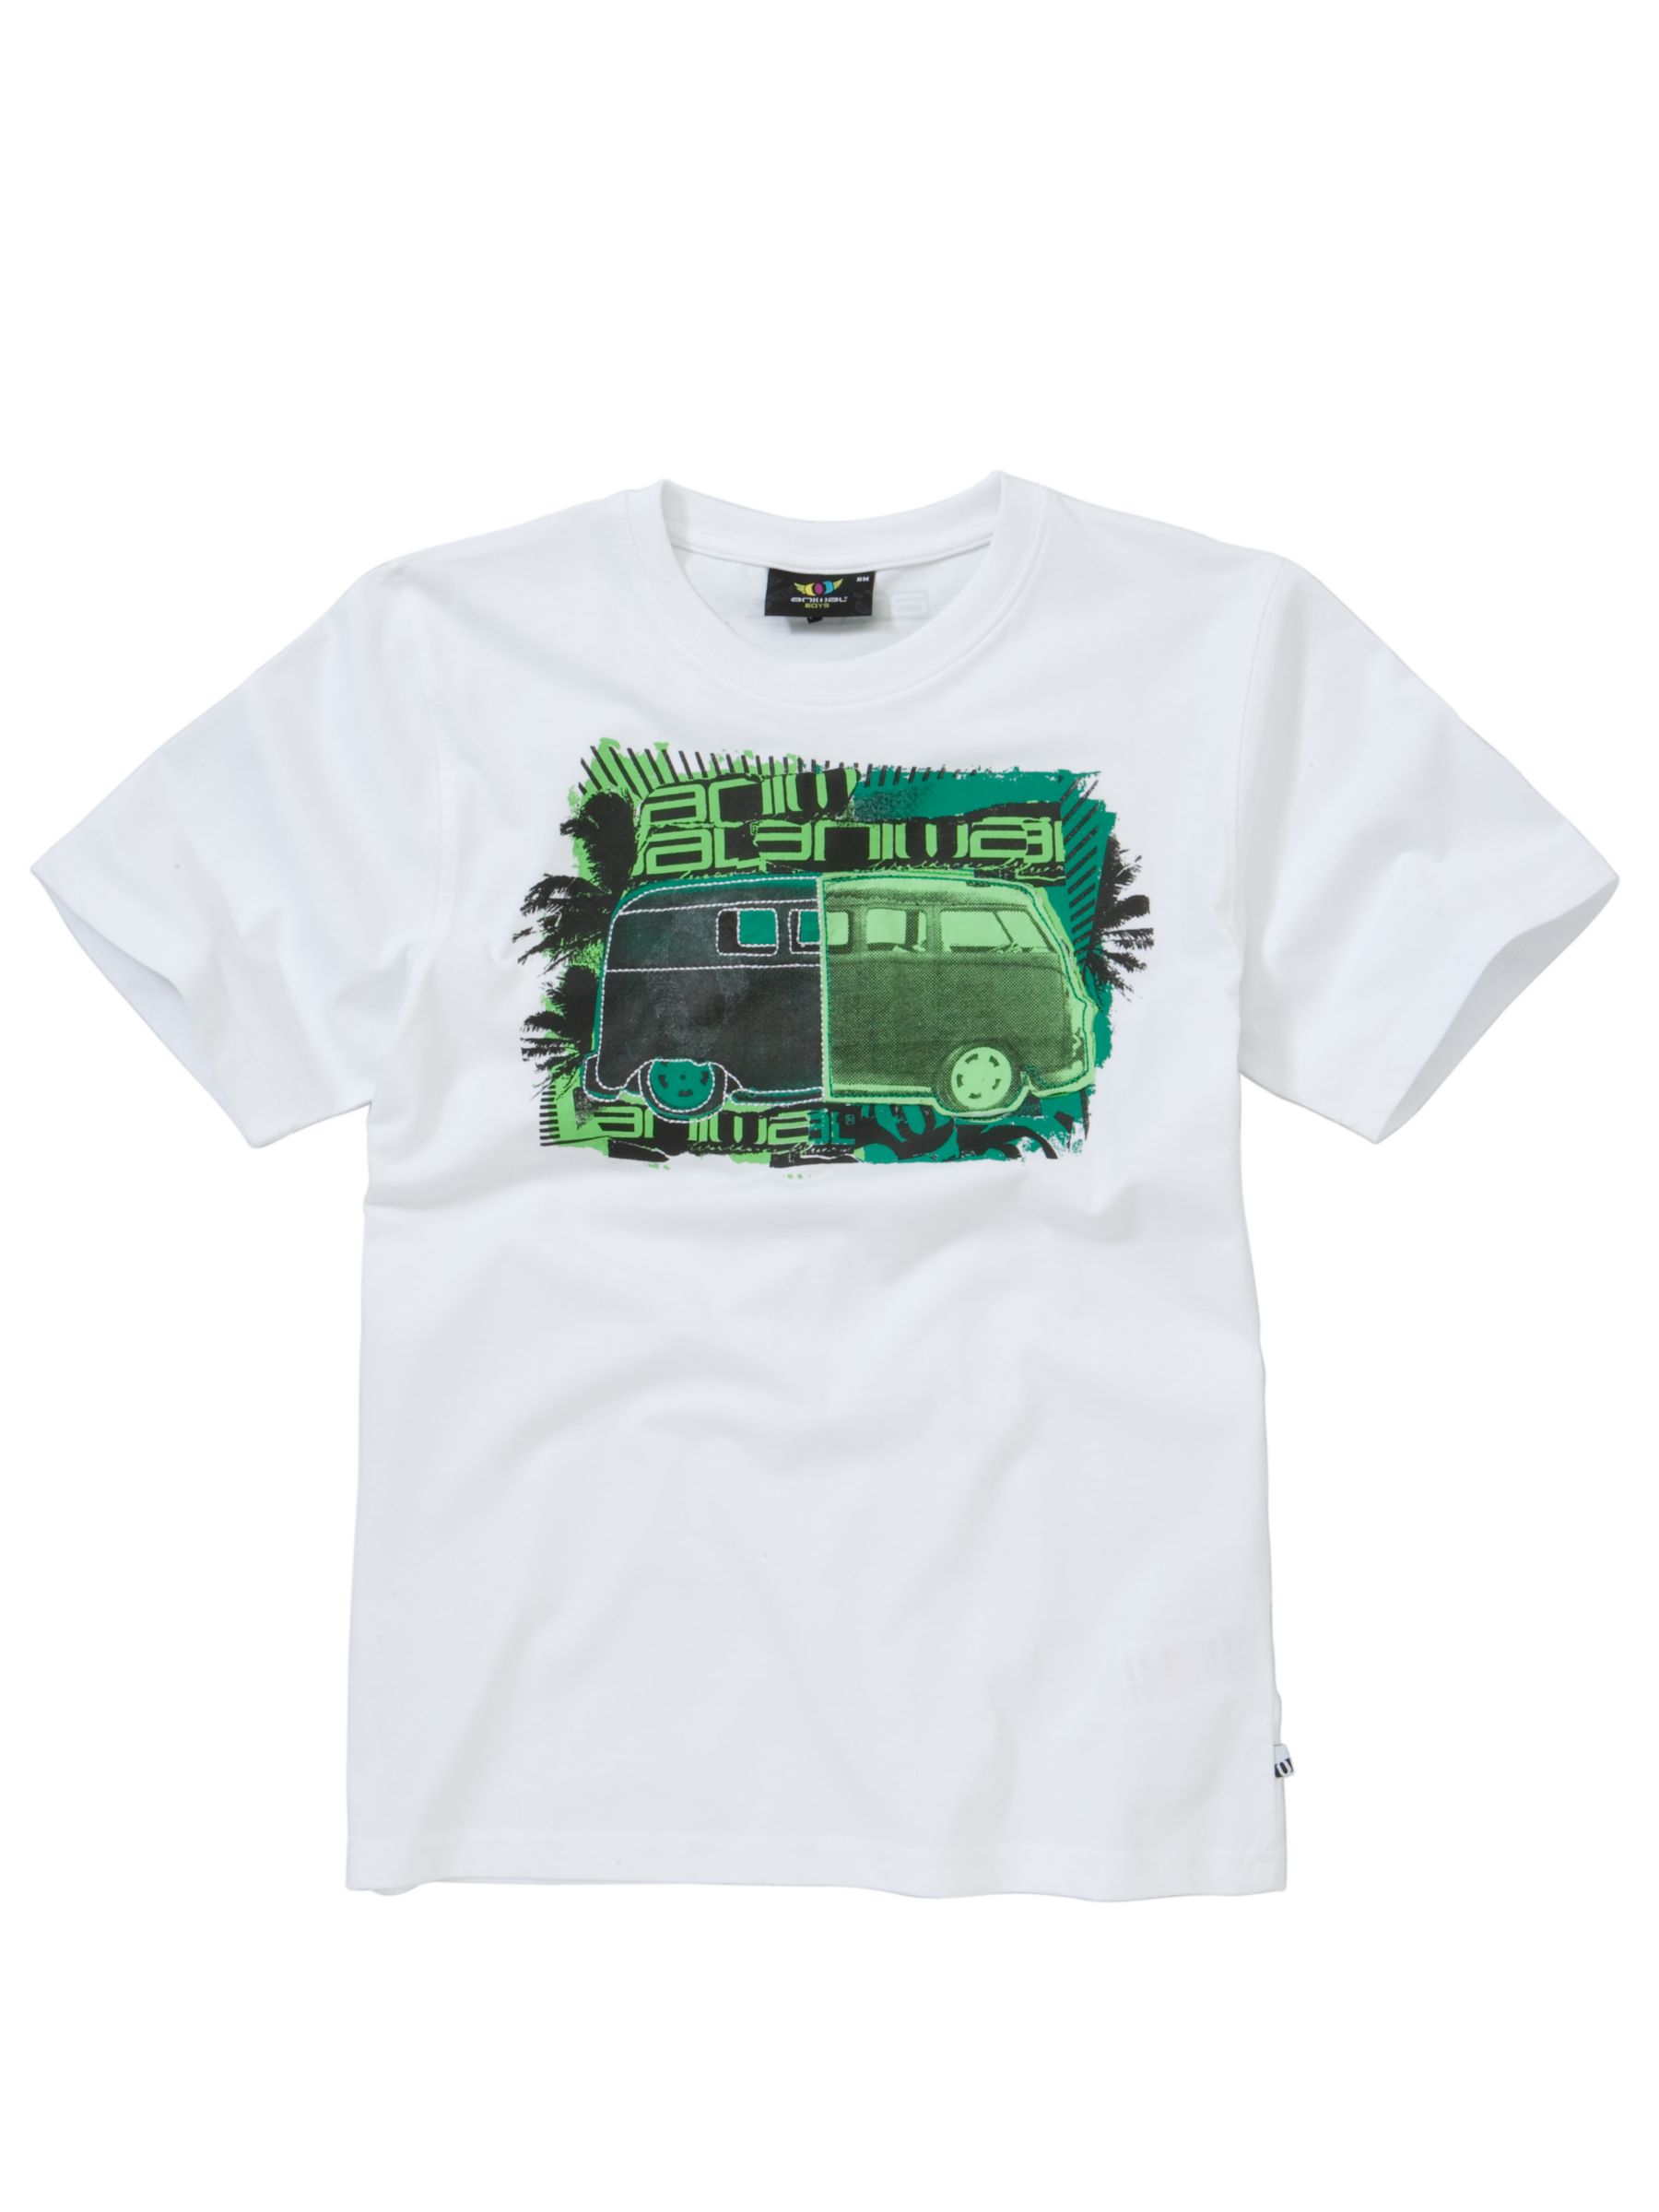 Hayes Deluxe T-Shirt, White